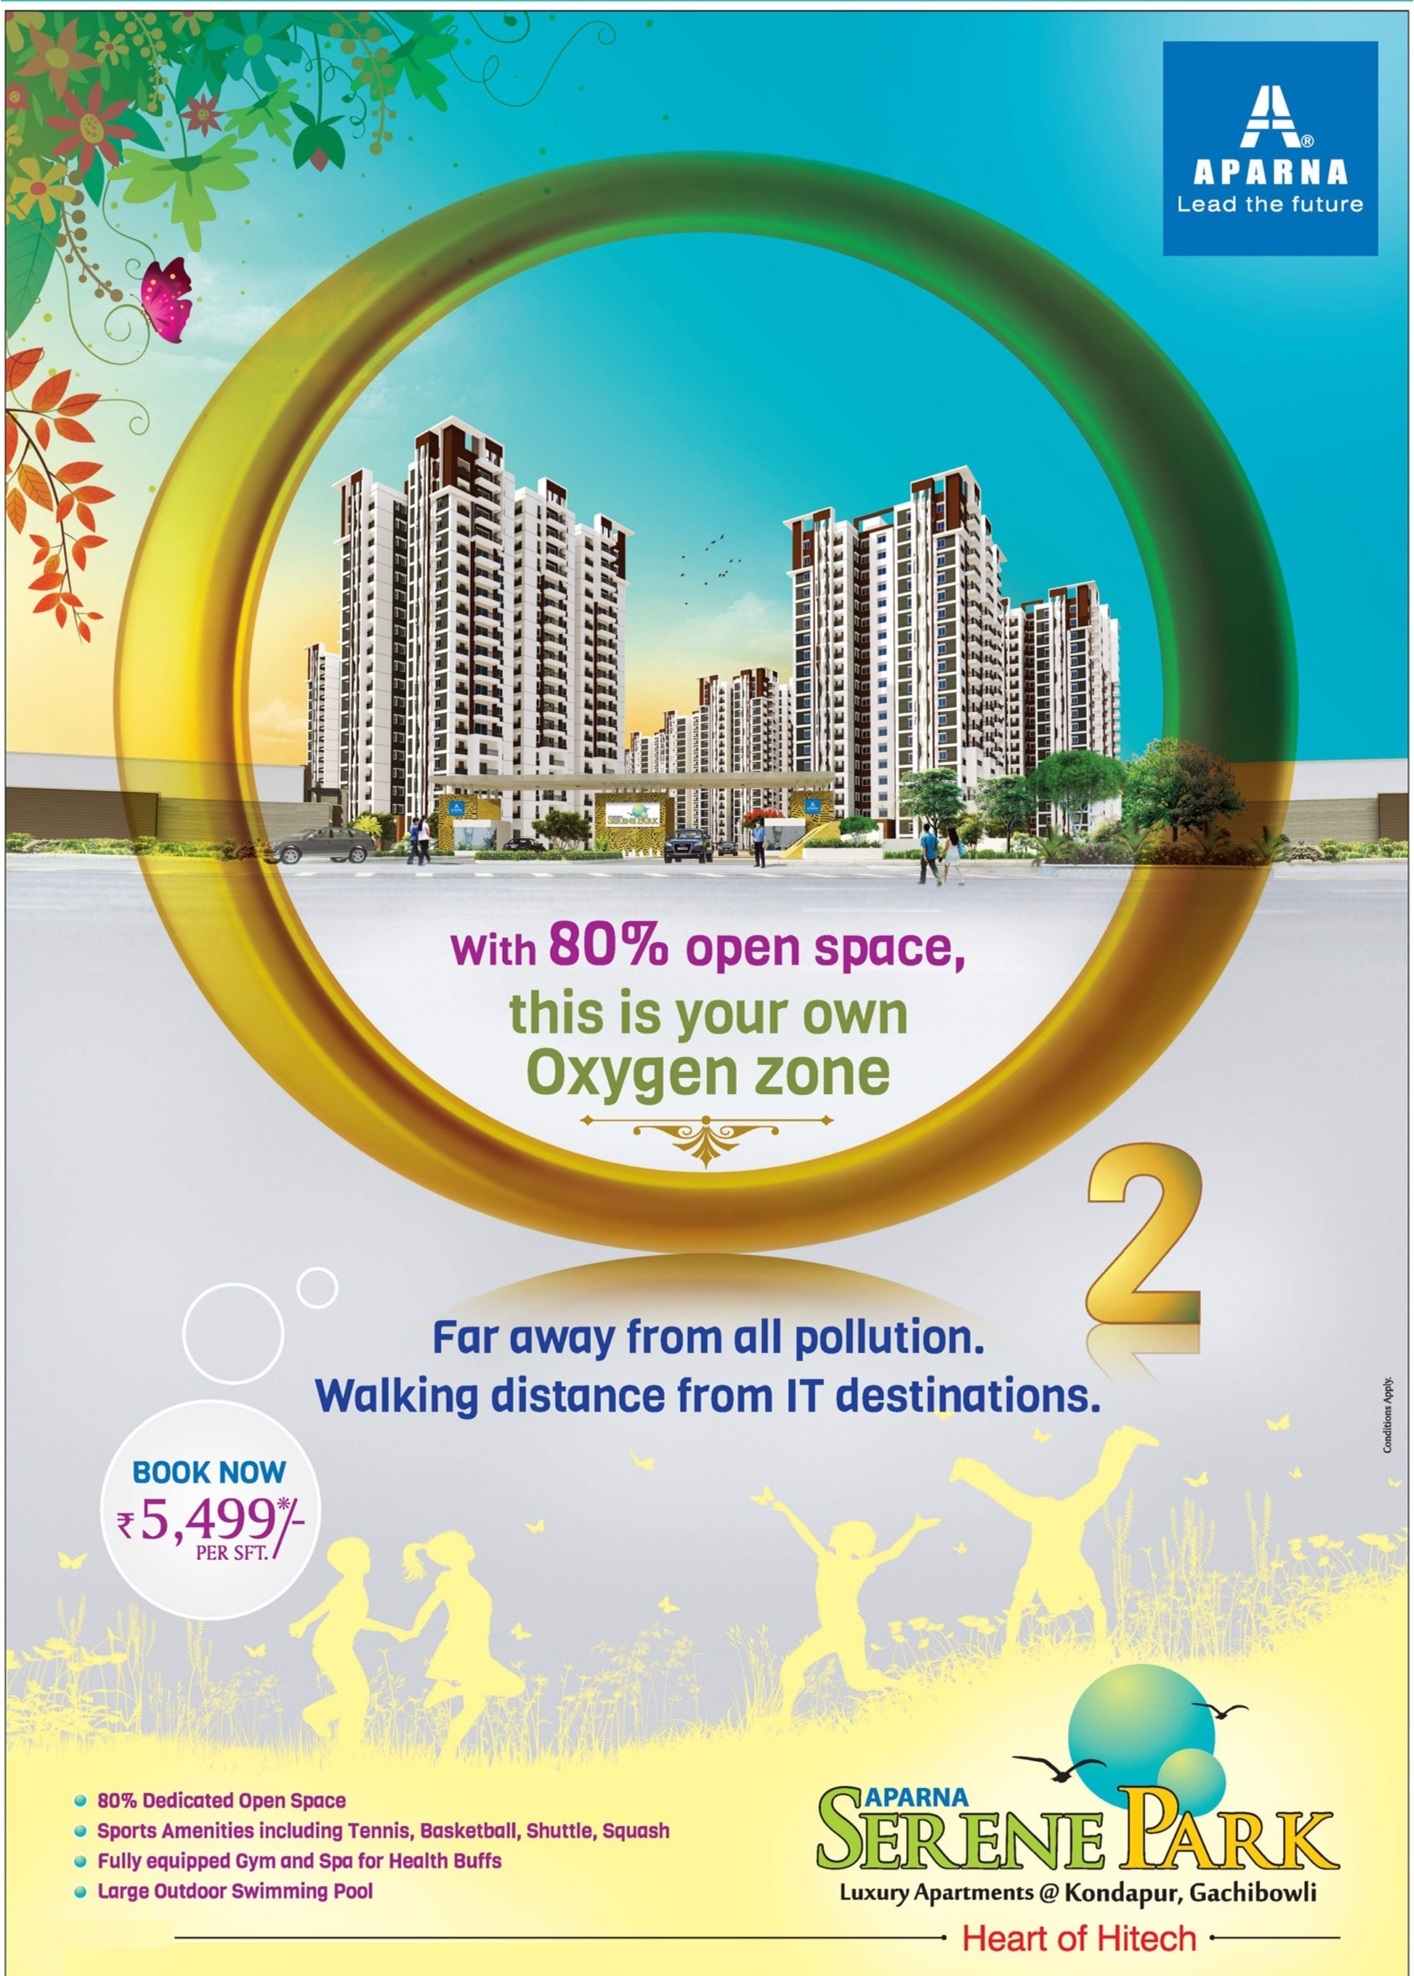 Aparna Serene Park with 80% is your own oxygen zone in Hyderabad